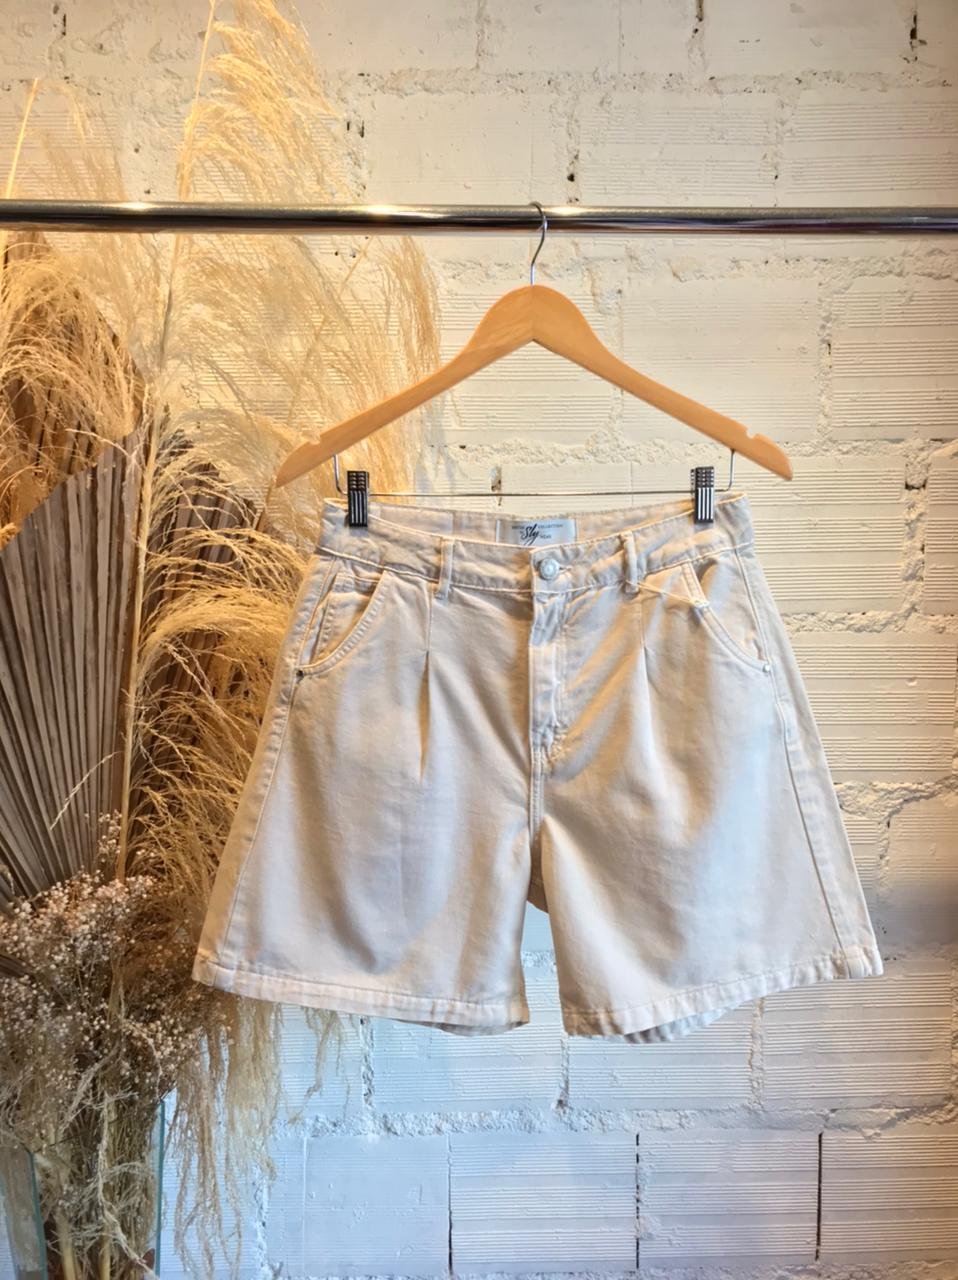 Short Jeans Areia Sly Wear